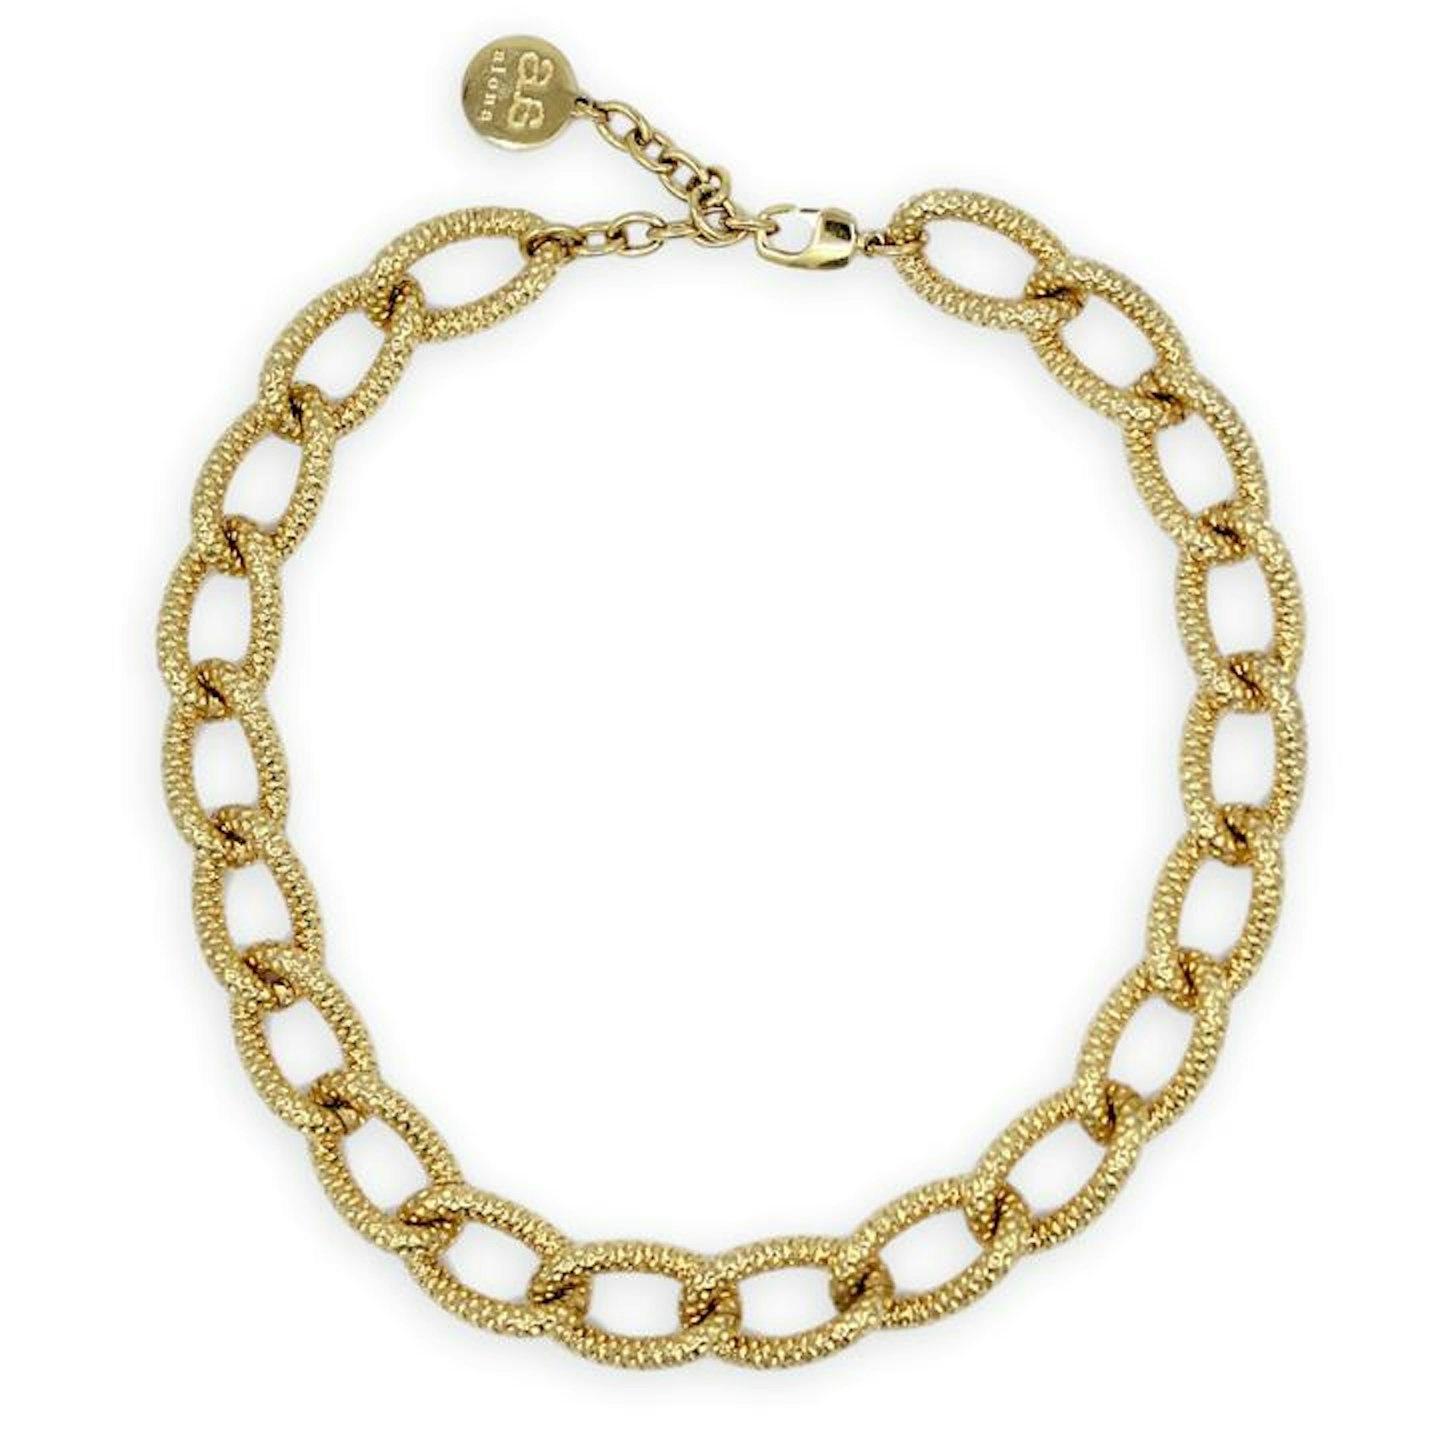 By Alona, Gold Chain Necklace, £190